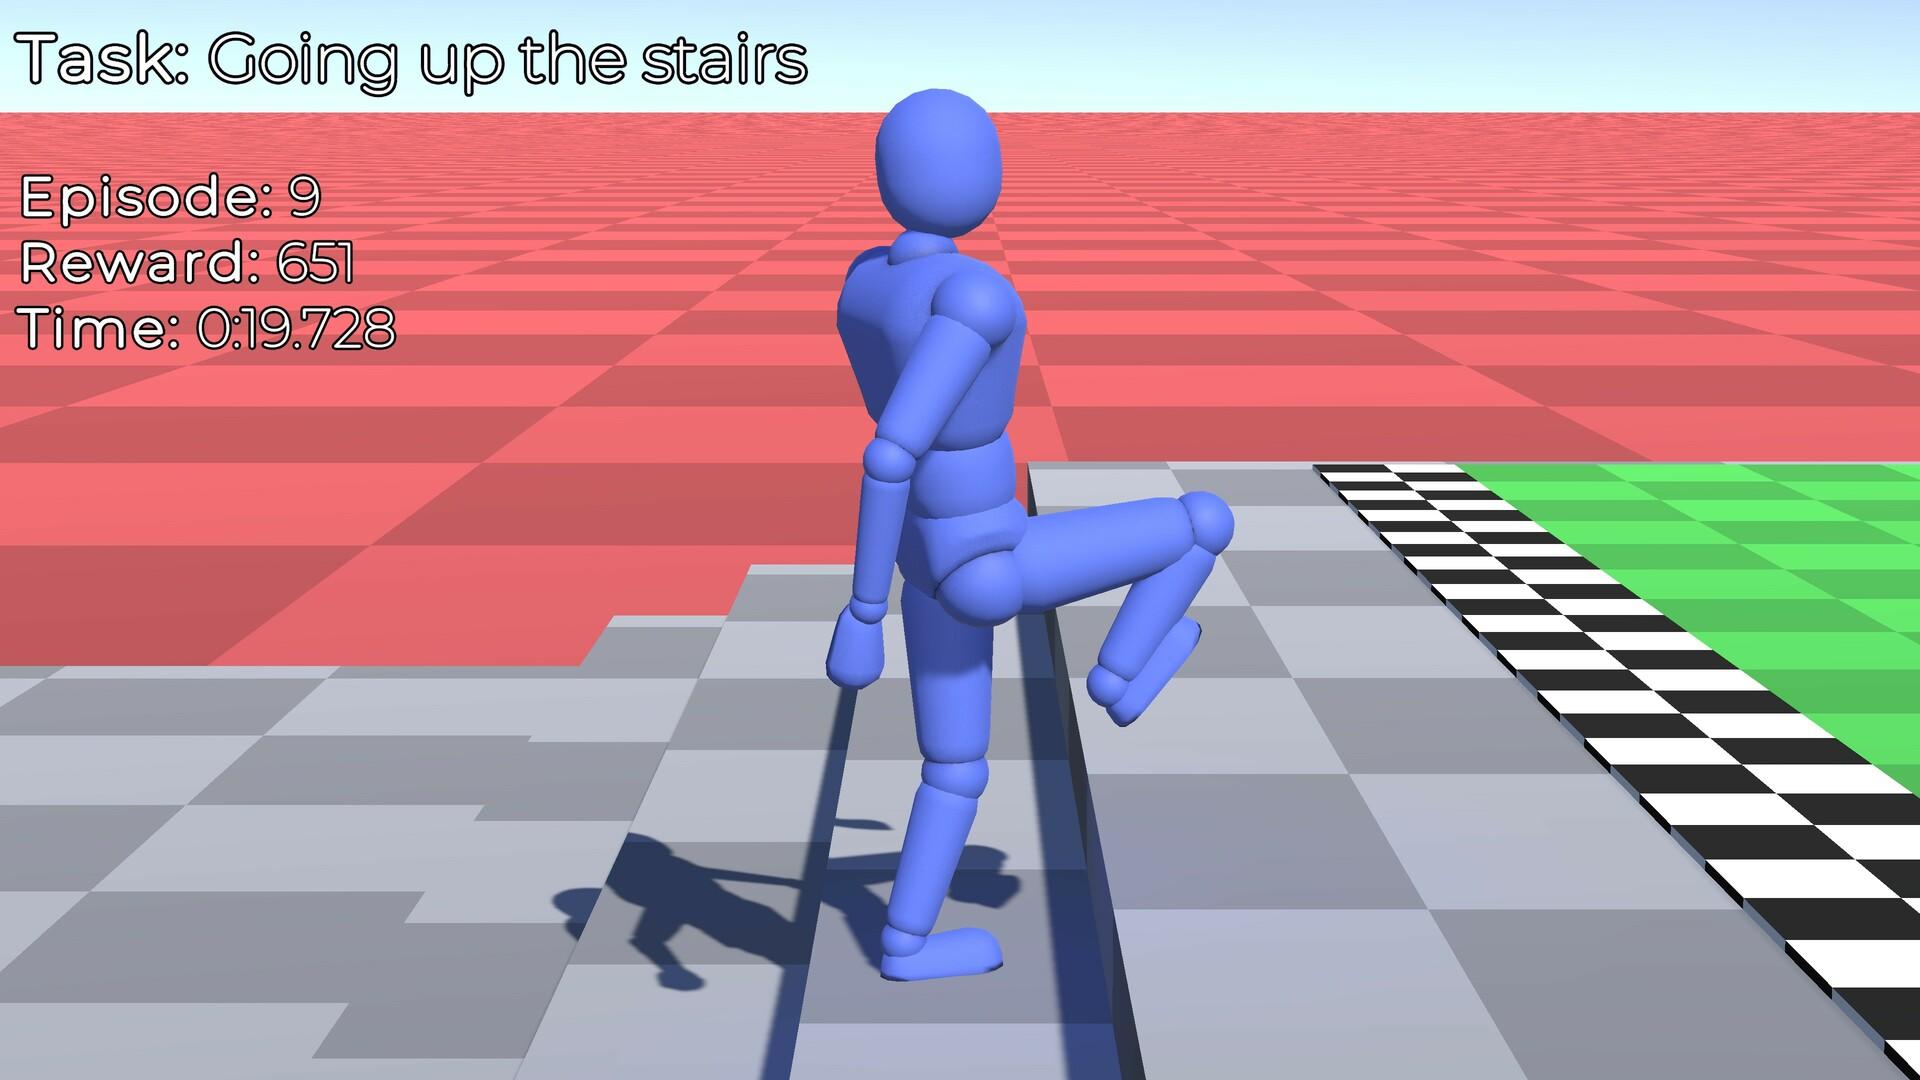 Baby Steps is a new game from the creator of Getting Over It & QWOP